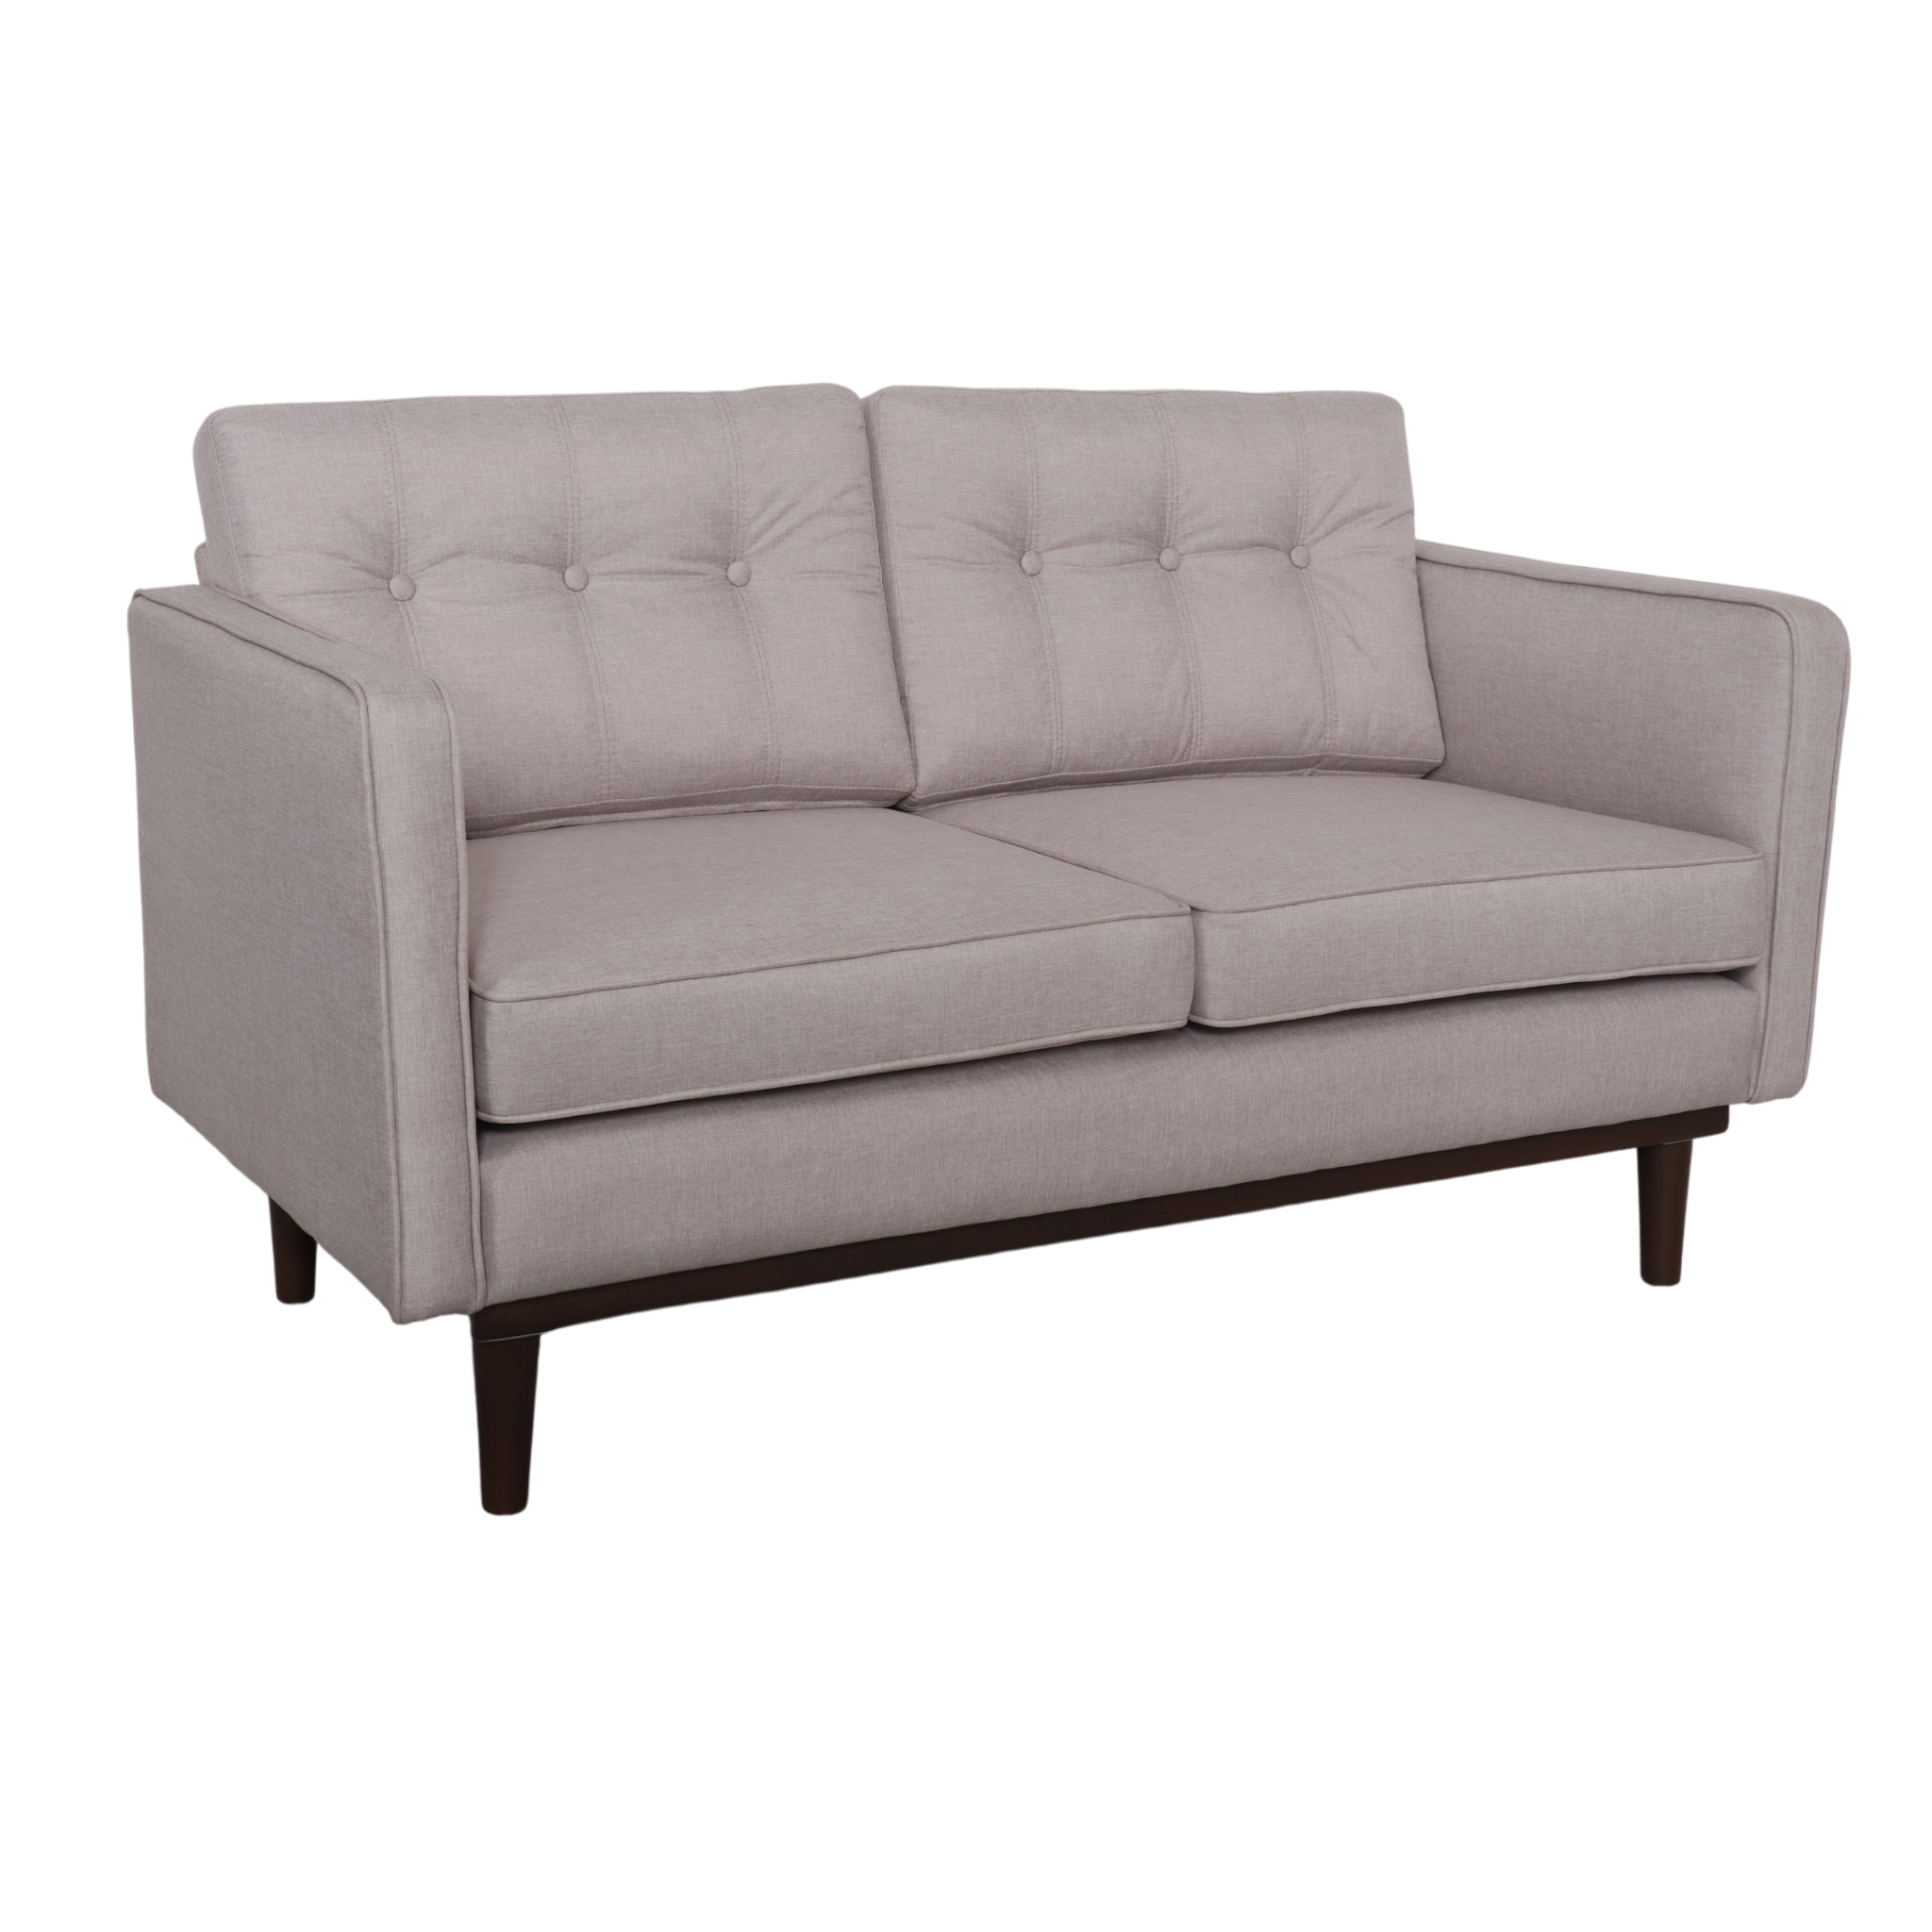 Jerry 2-Seater Fabric Sofa AF Home